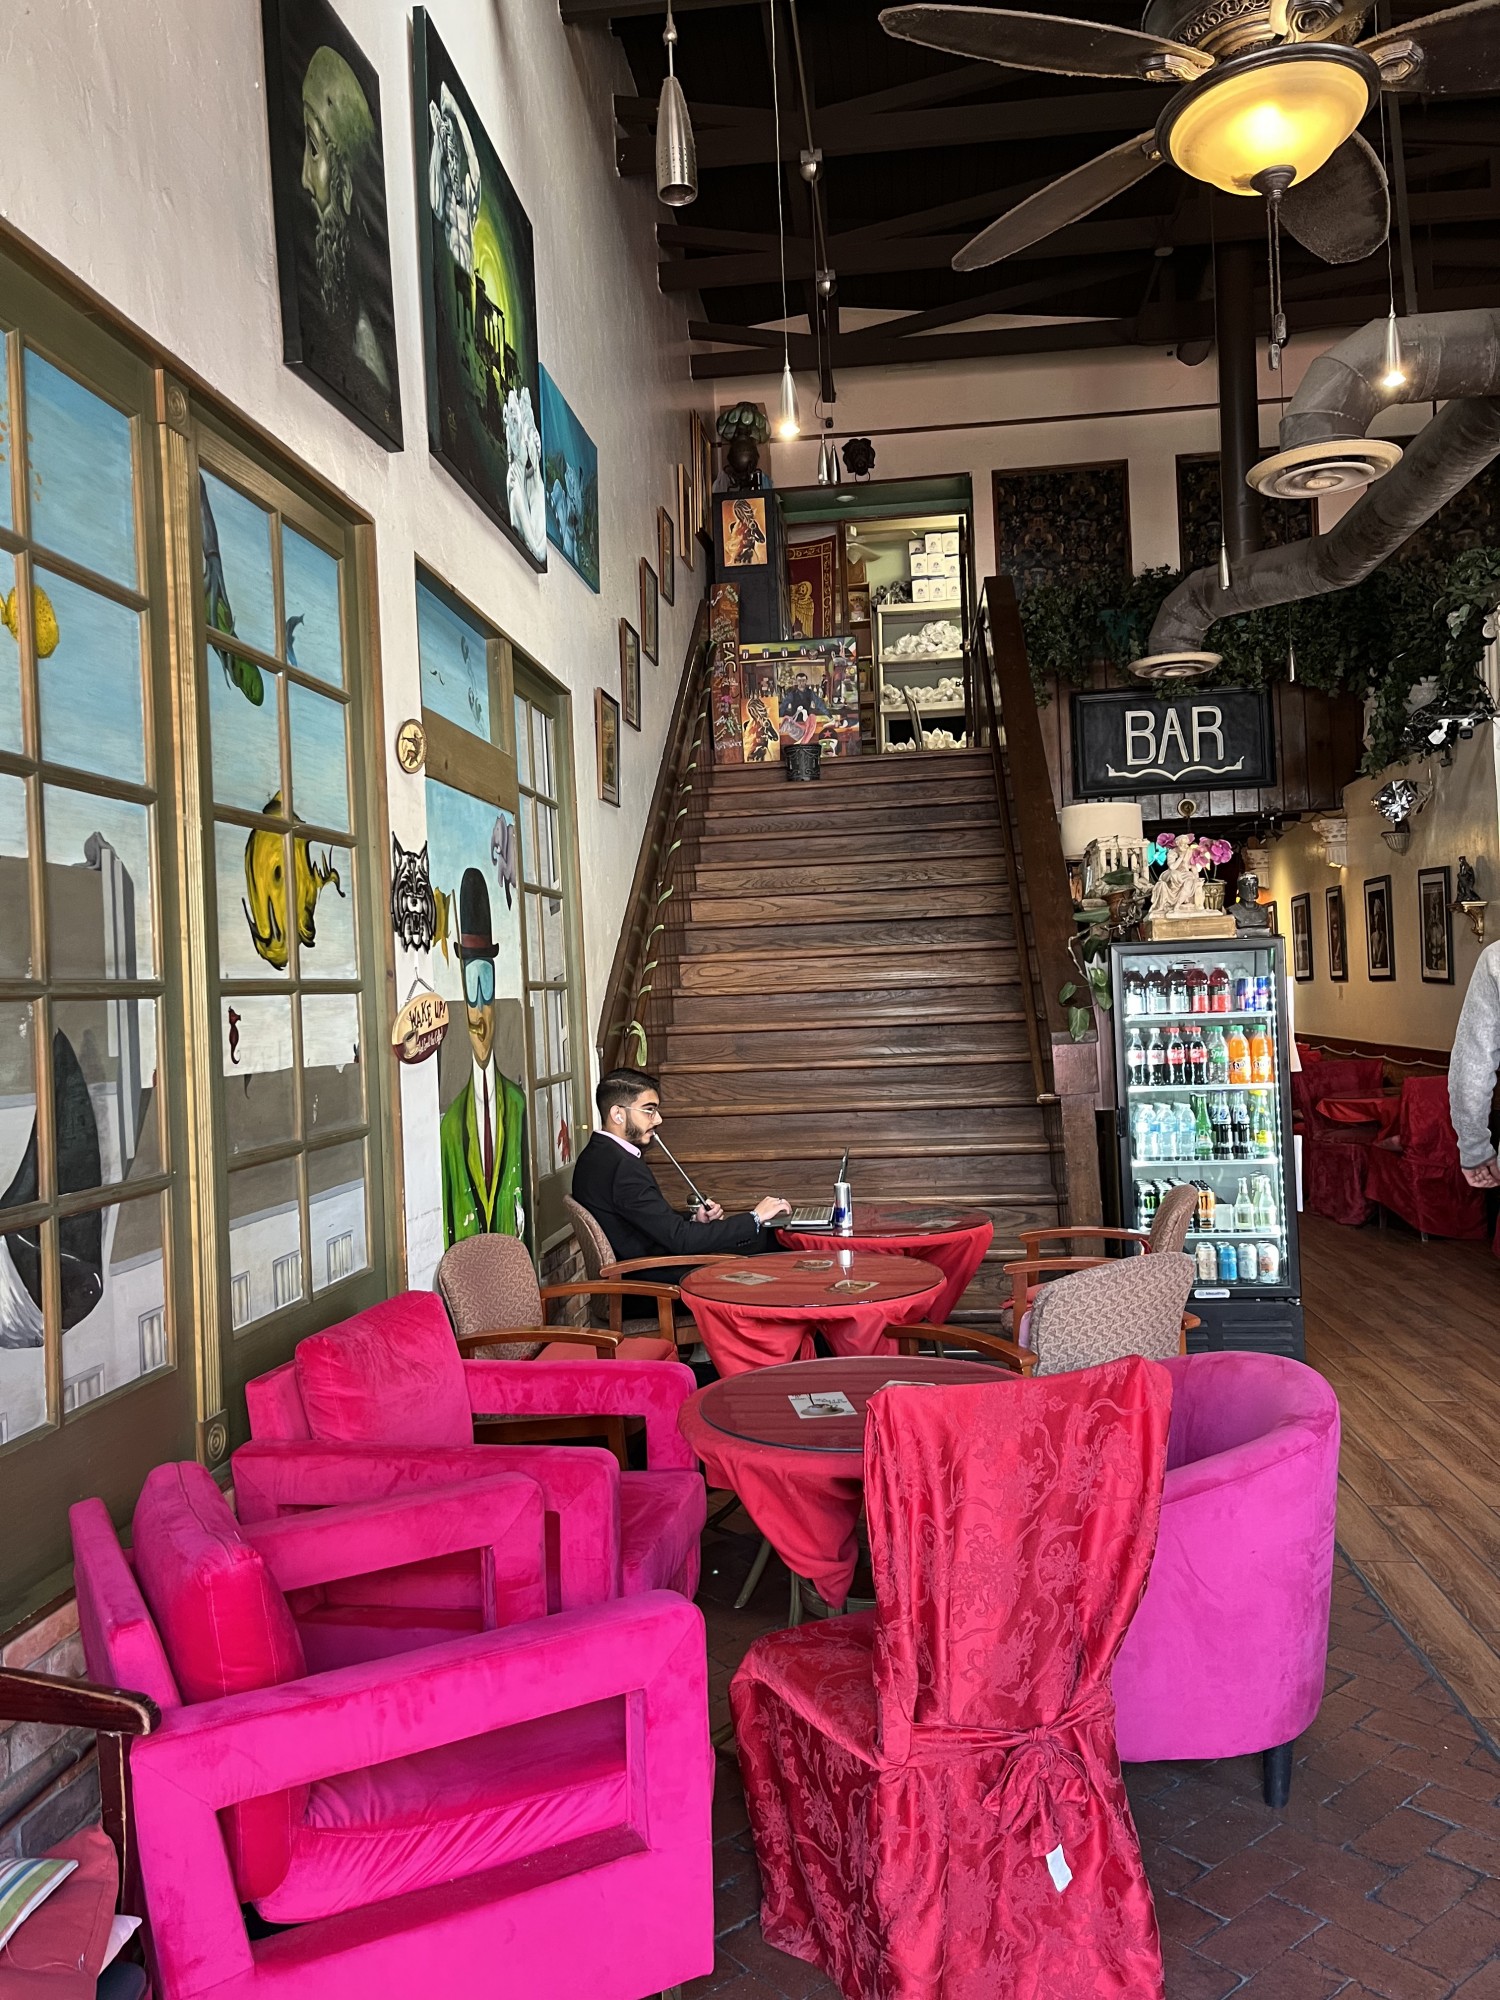 As soon as you walk into Espresso Art Cafe, you are struck by the vibrant hot pink velvet chairs and multiple paintings decorating the wall. Be sure to try one of Espresso's unique live events happening every week! 